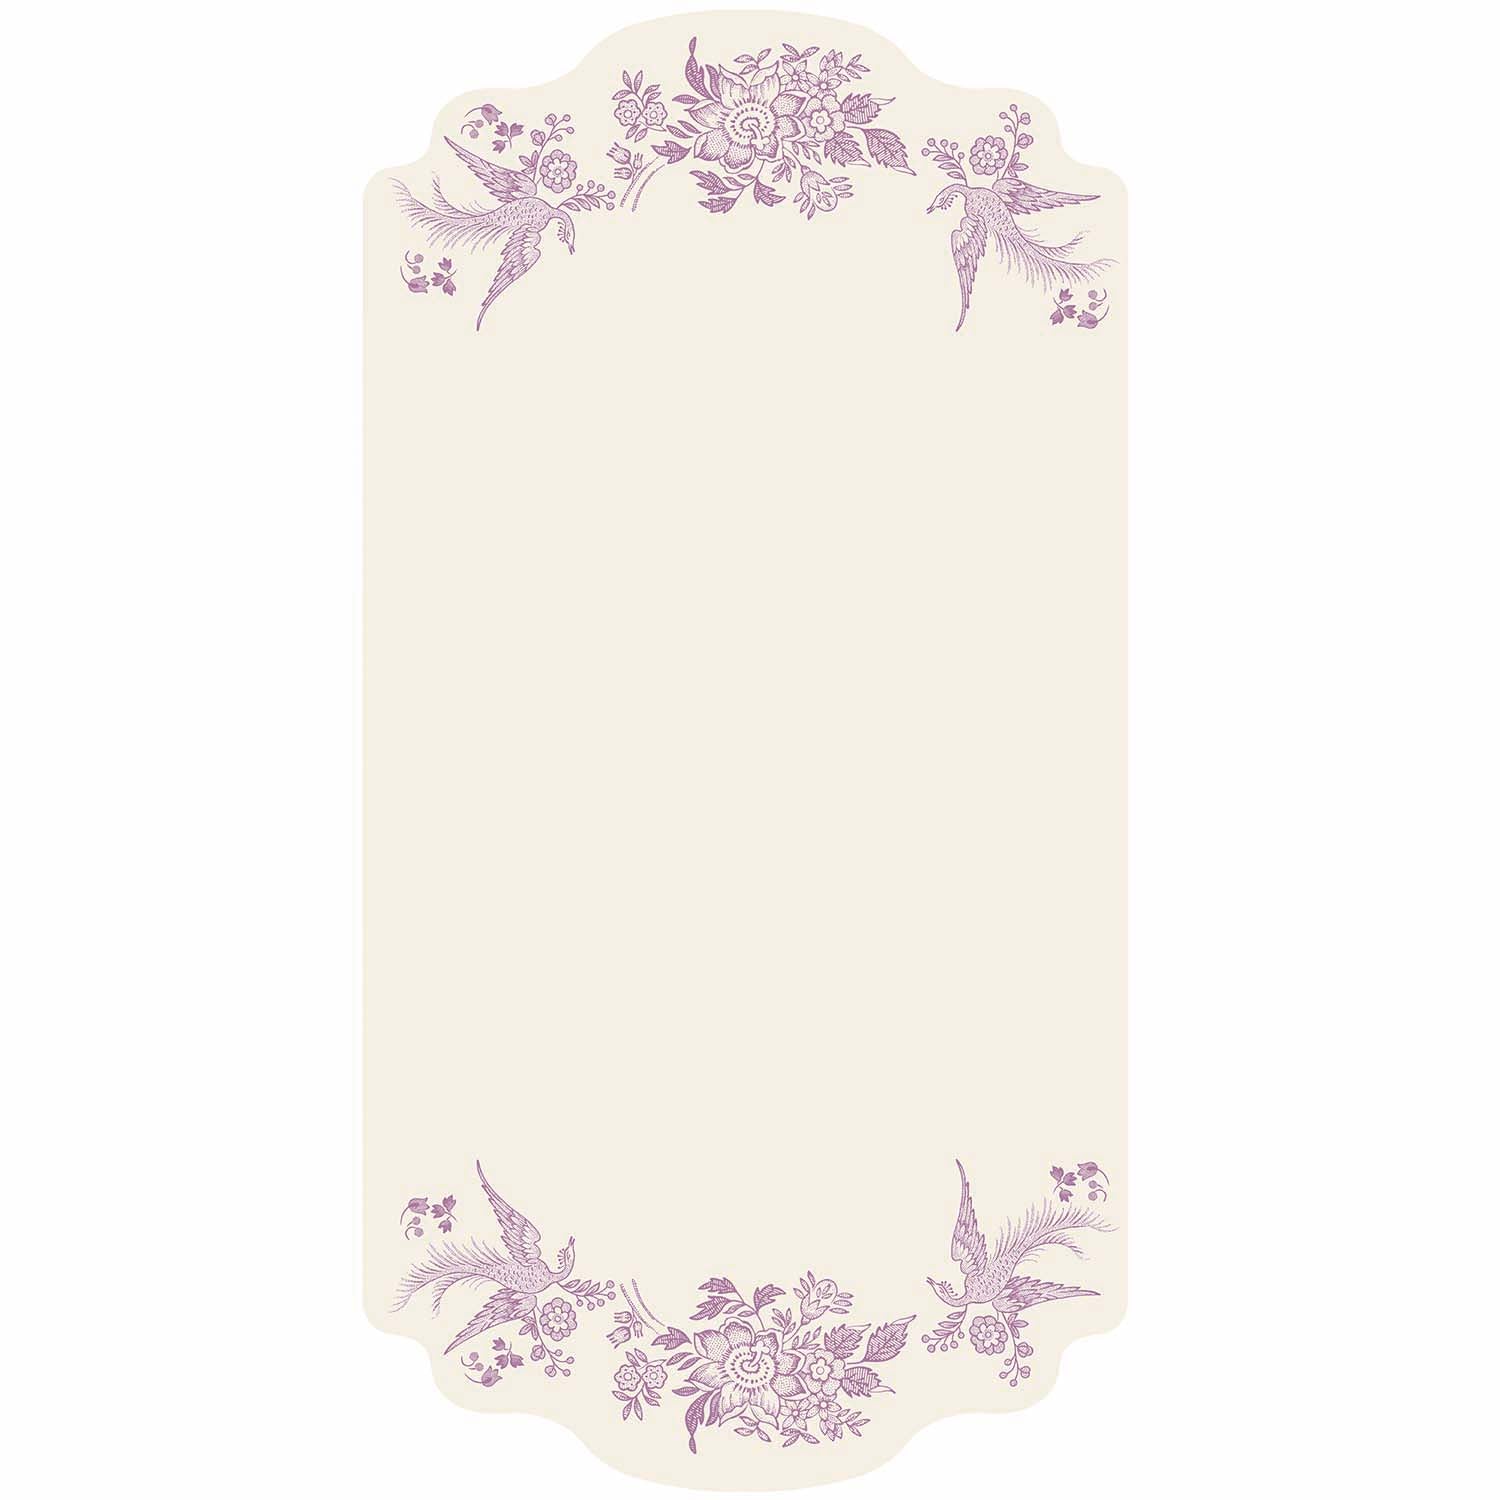 A white rectangular die-cut card featuring a lilac purple vintage Burleigh-style floral and bird design along the top and bottom edges.